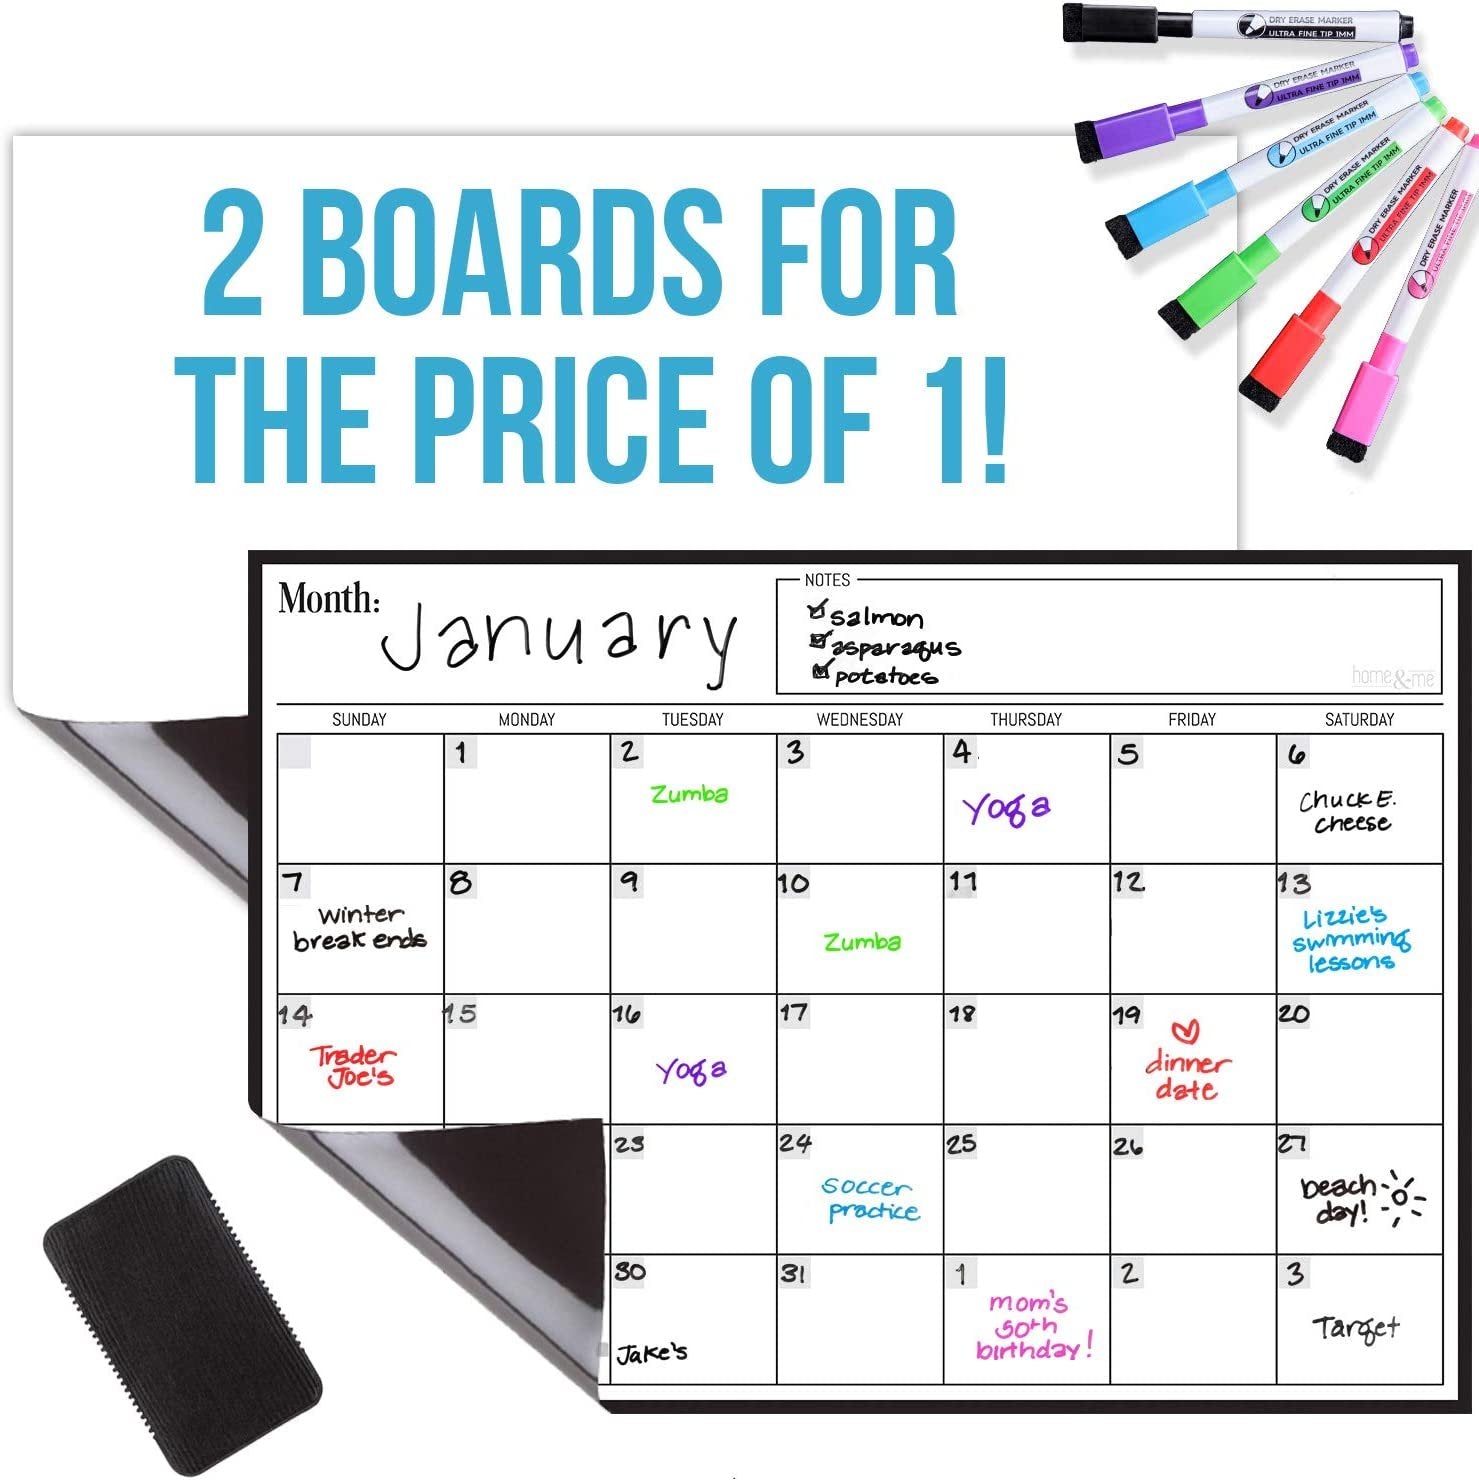 Monthly Magnetic Whiteboard - 2 Boards - 17x12 Size - 6 Markers - Large Eraser - Great for Fridge or Wall - White